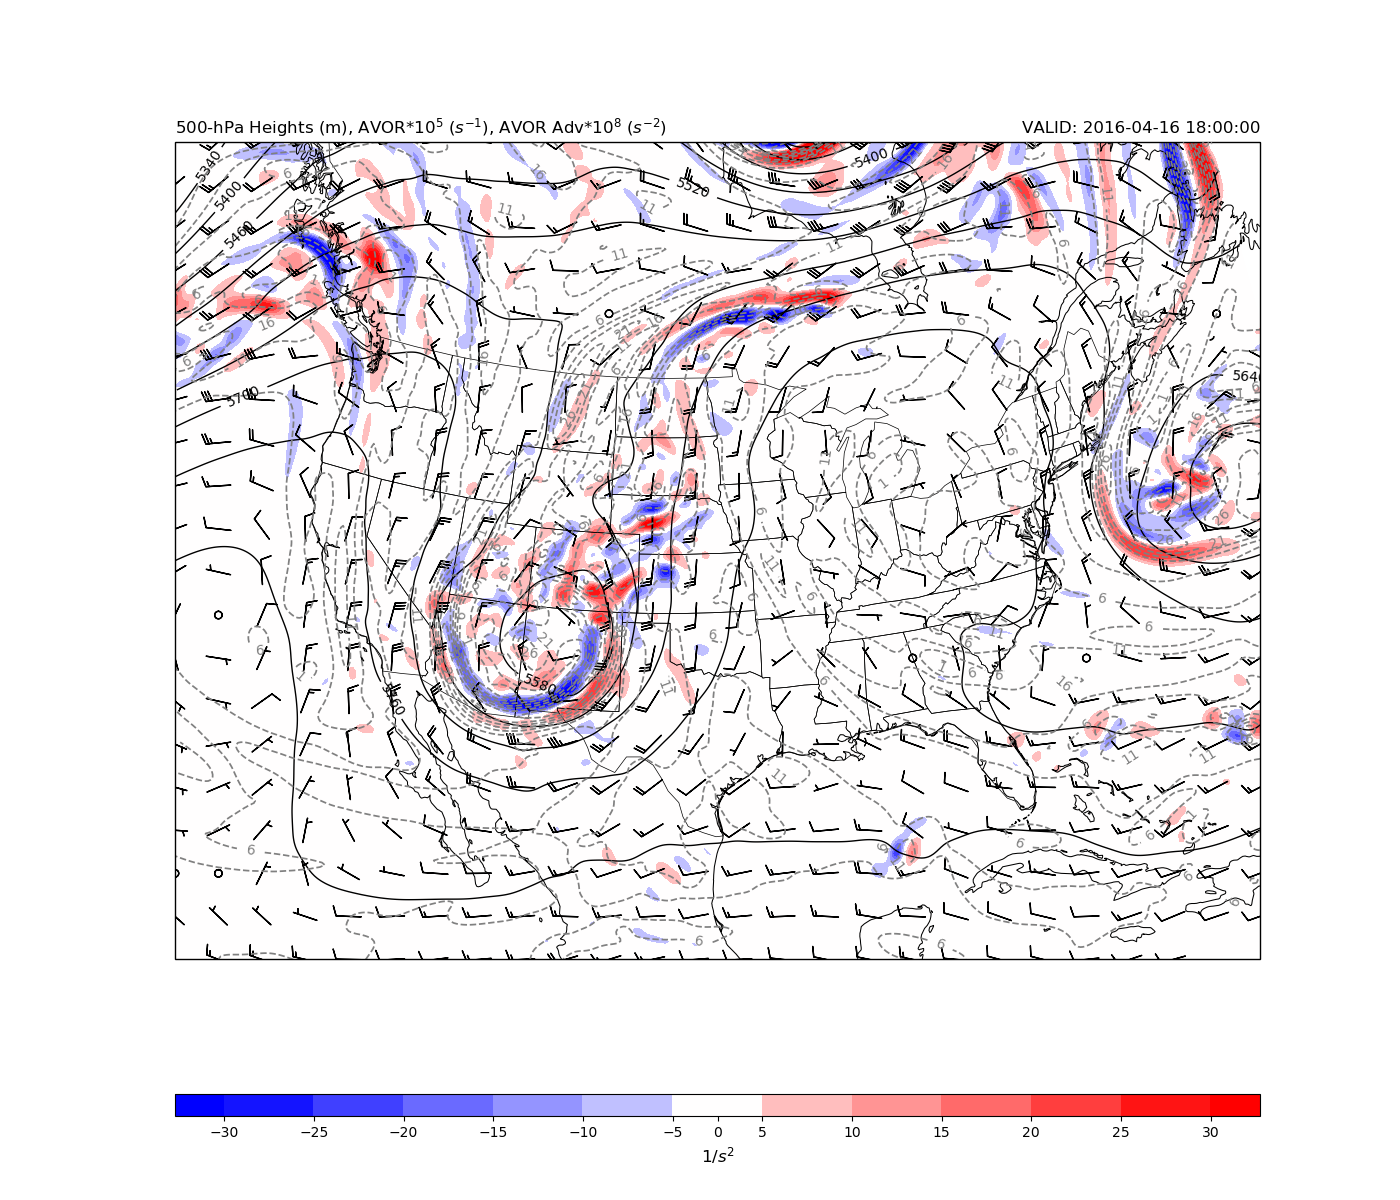 ../_images/sphx_glr_500hPa_Vorticity_Advection_001.png